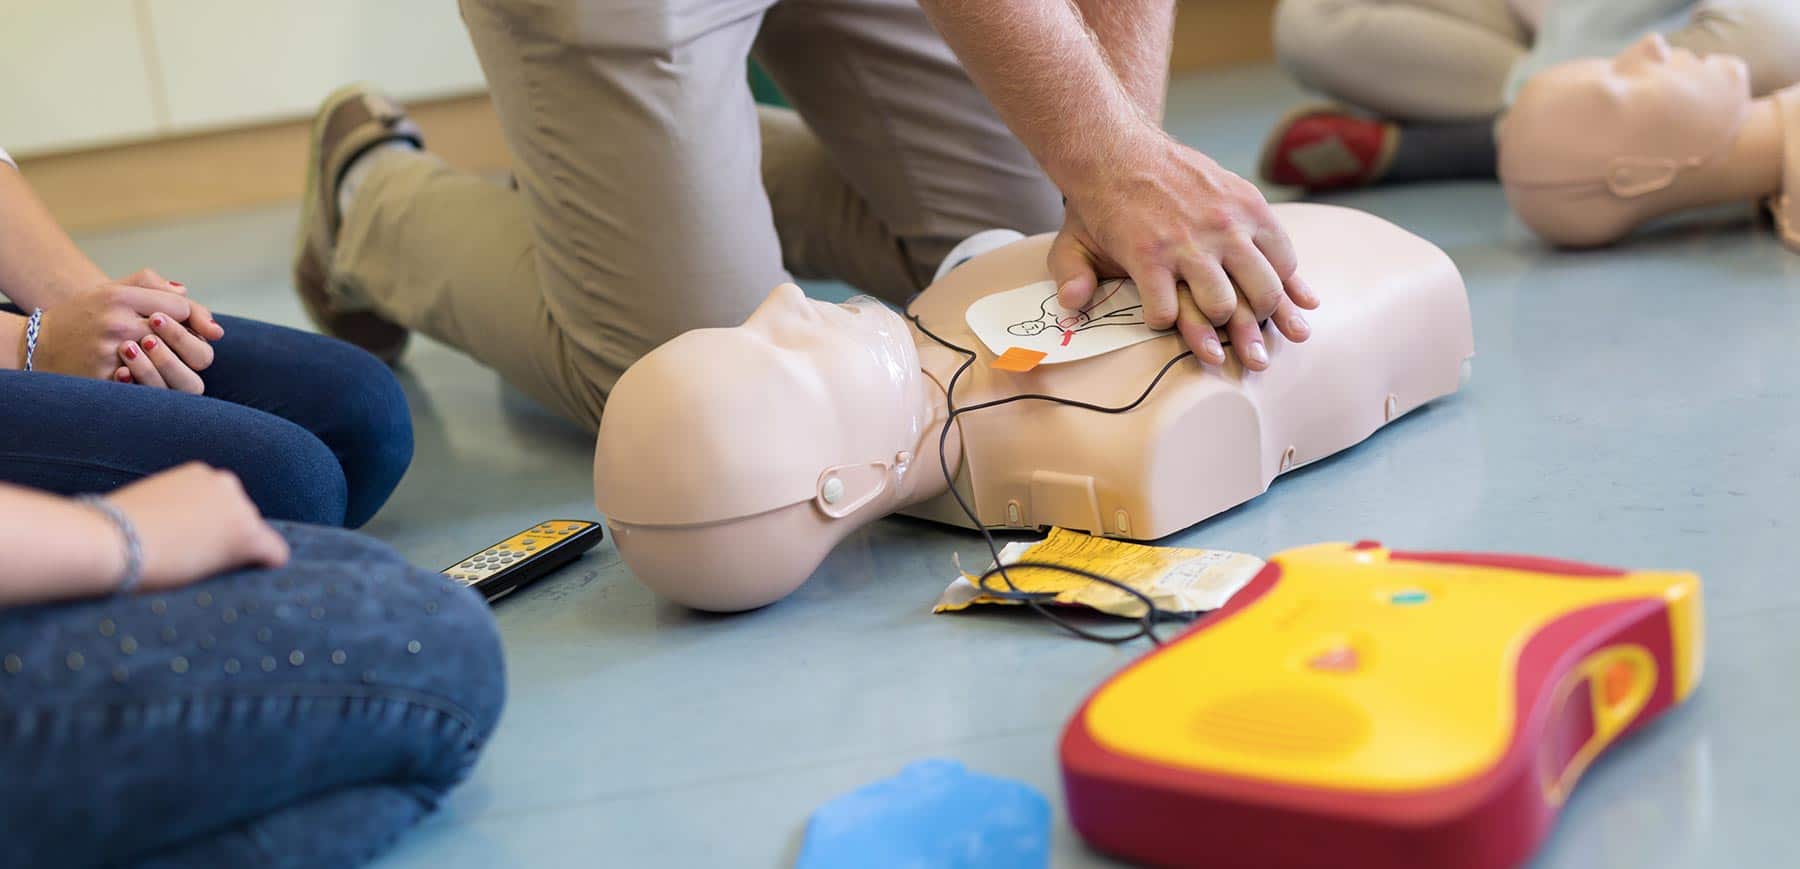 What Is an AED and What Is It Used For?